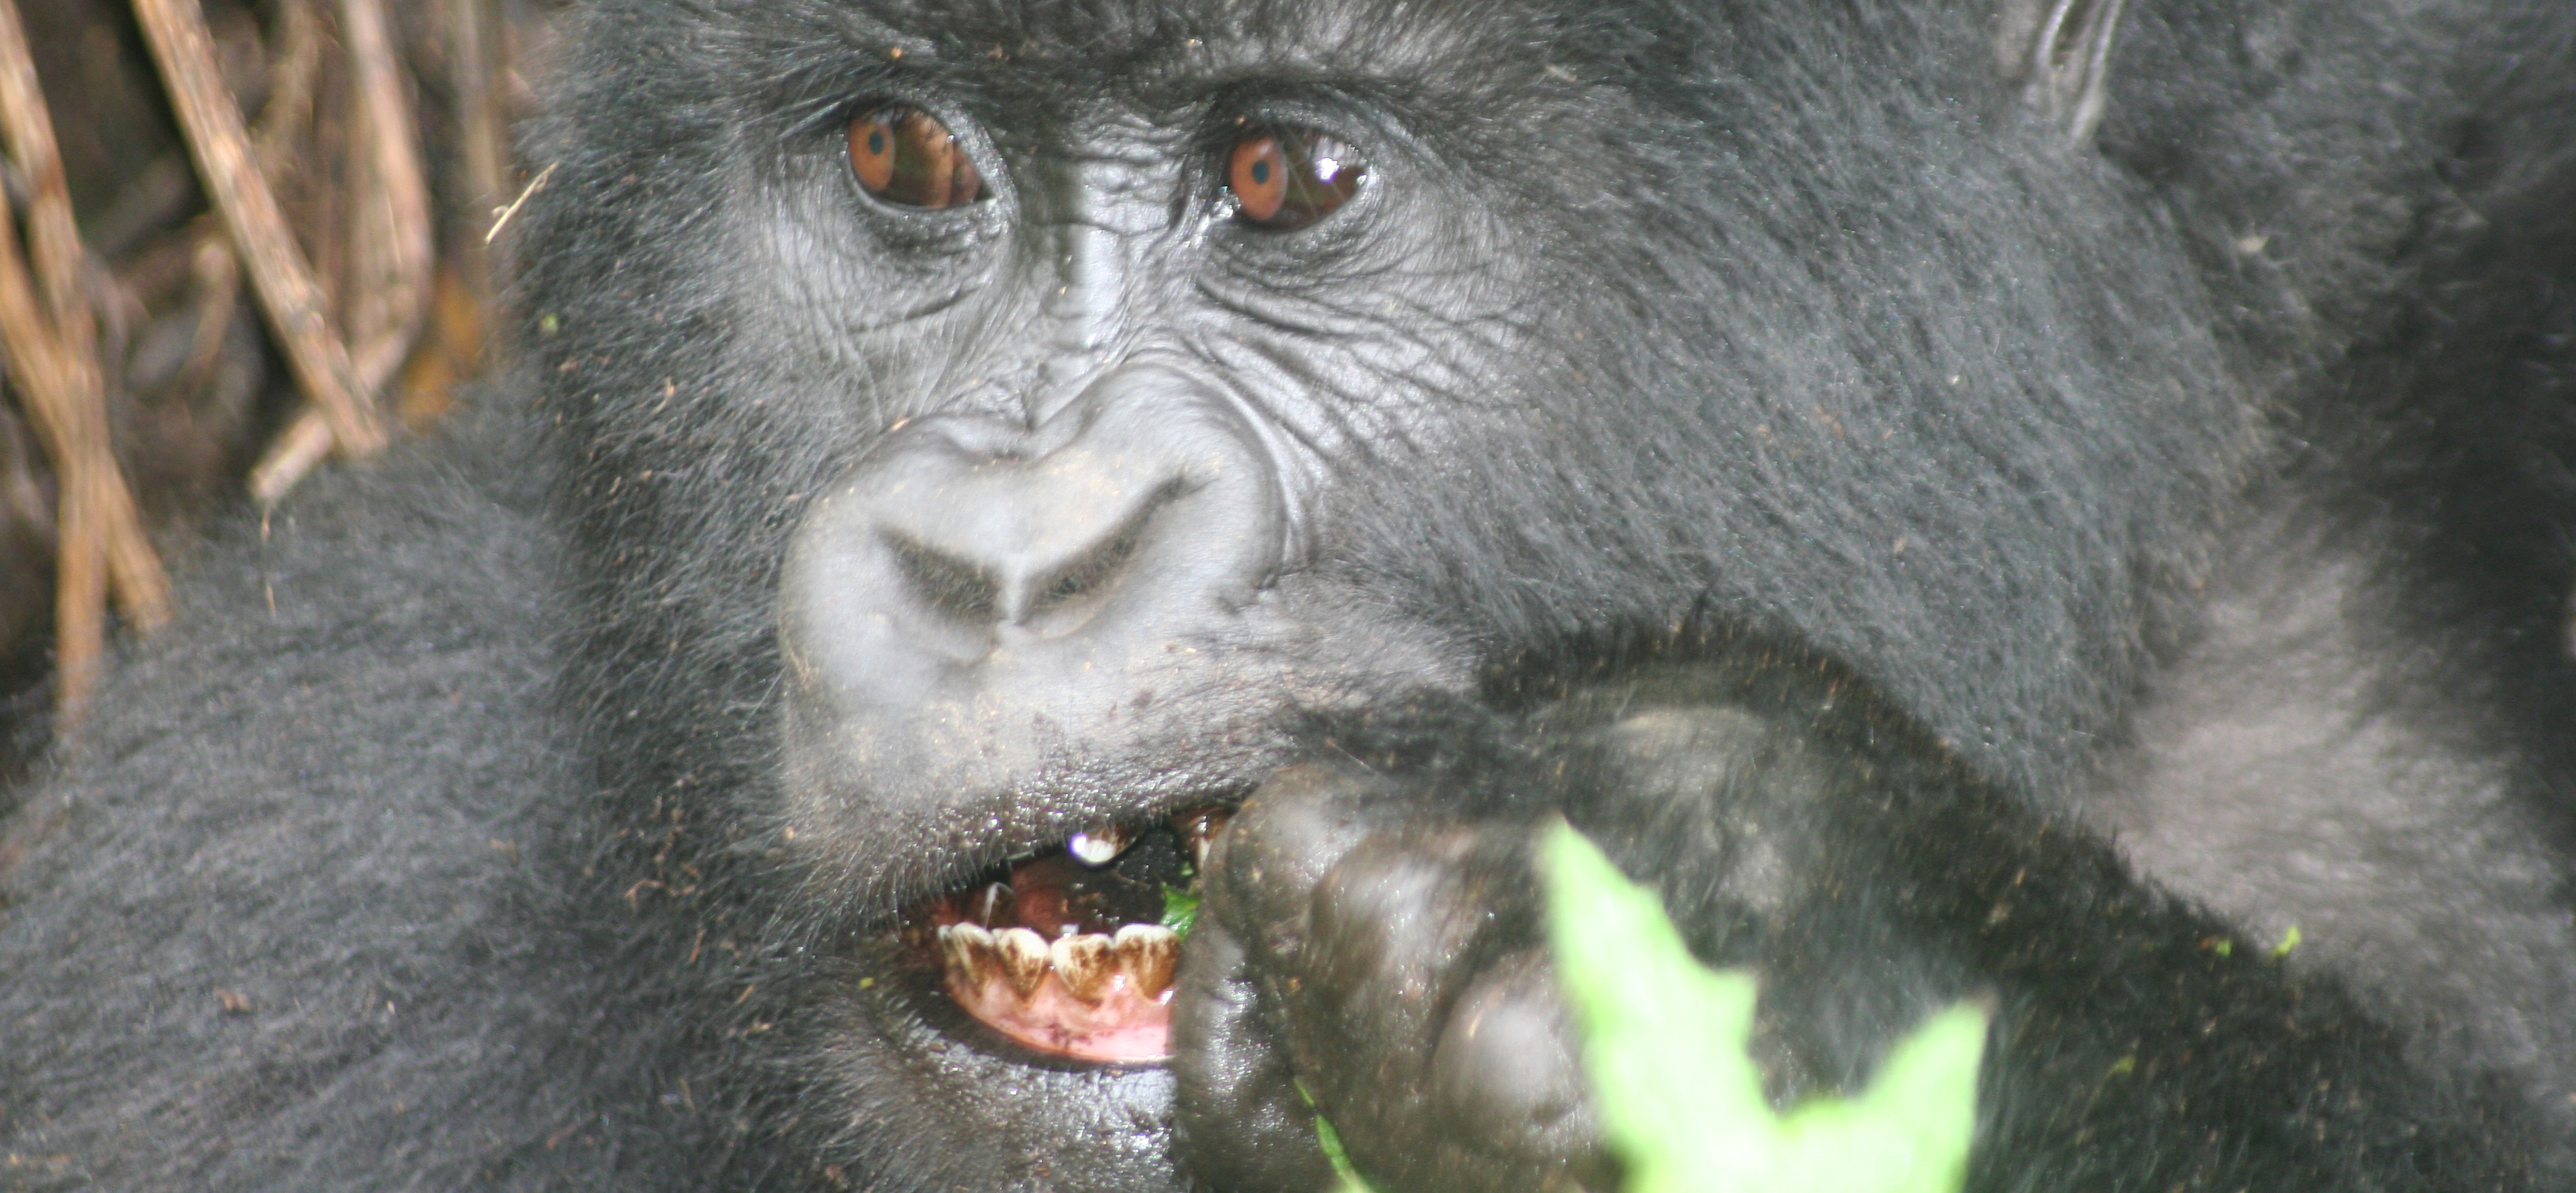 Responsible Community Based Tourism and Sustainable Ecotourism Initiatives around Protected Rural Area of the Virunga.